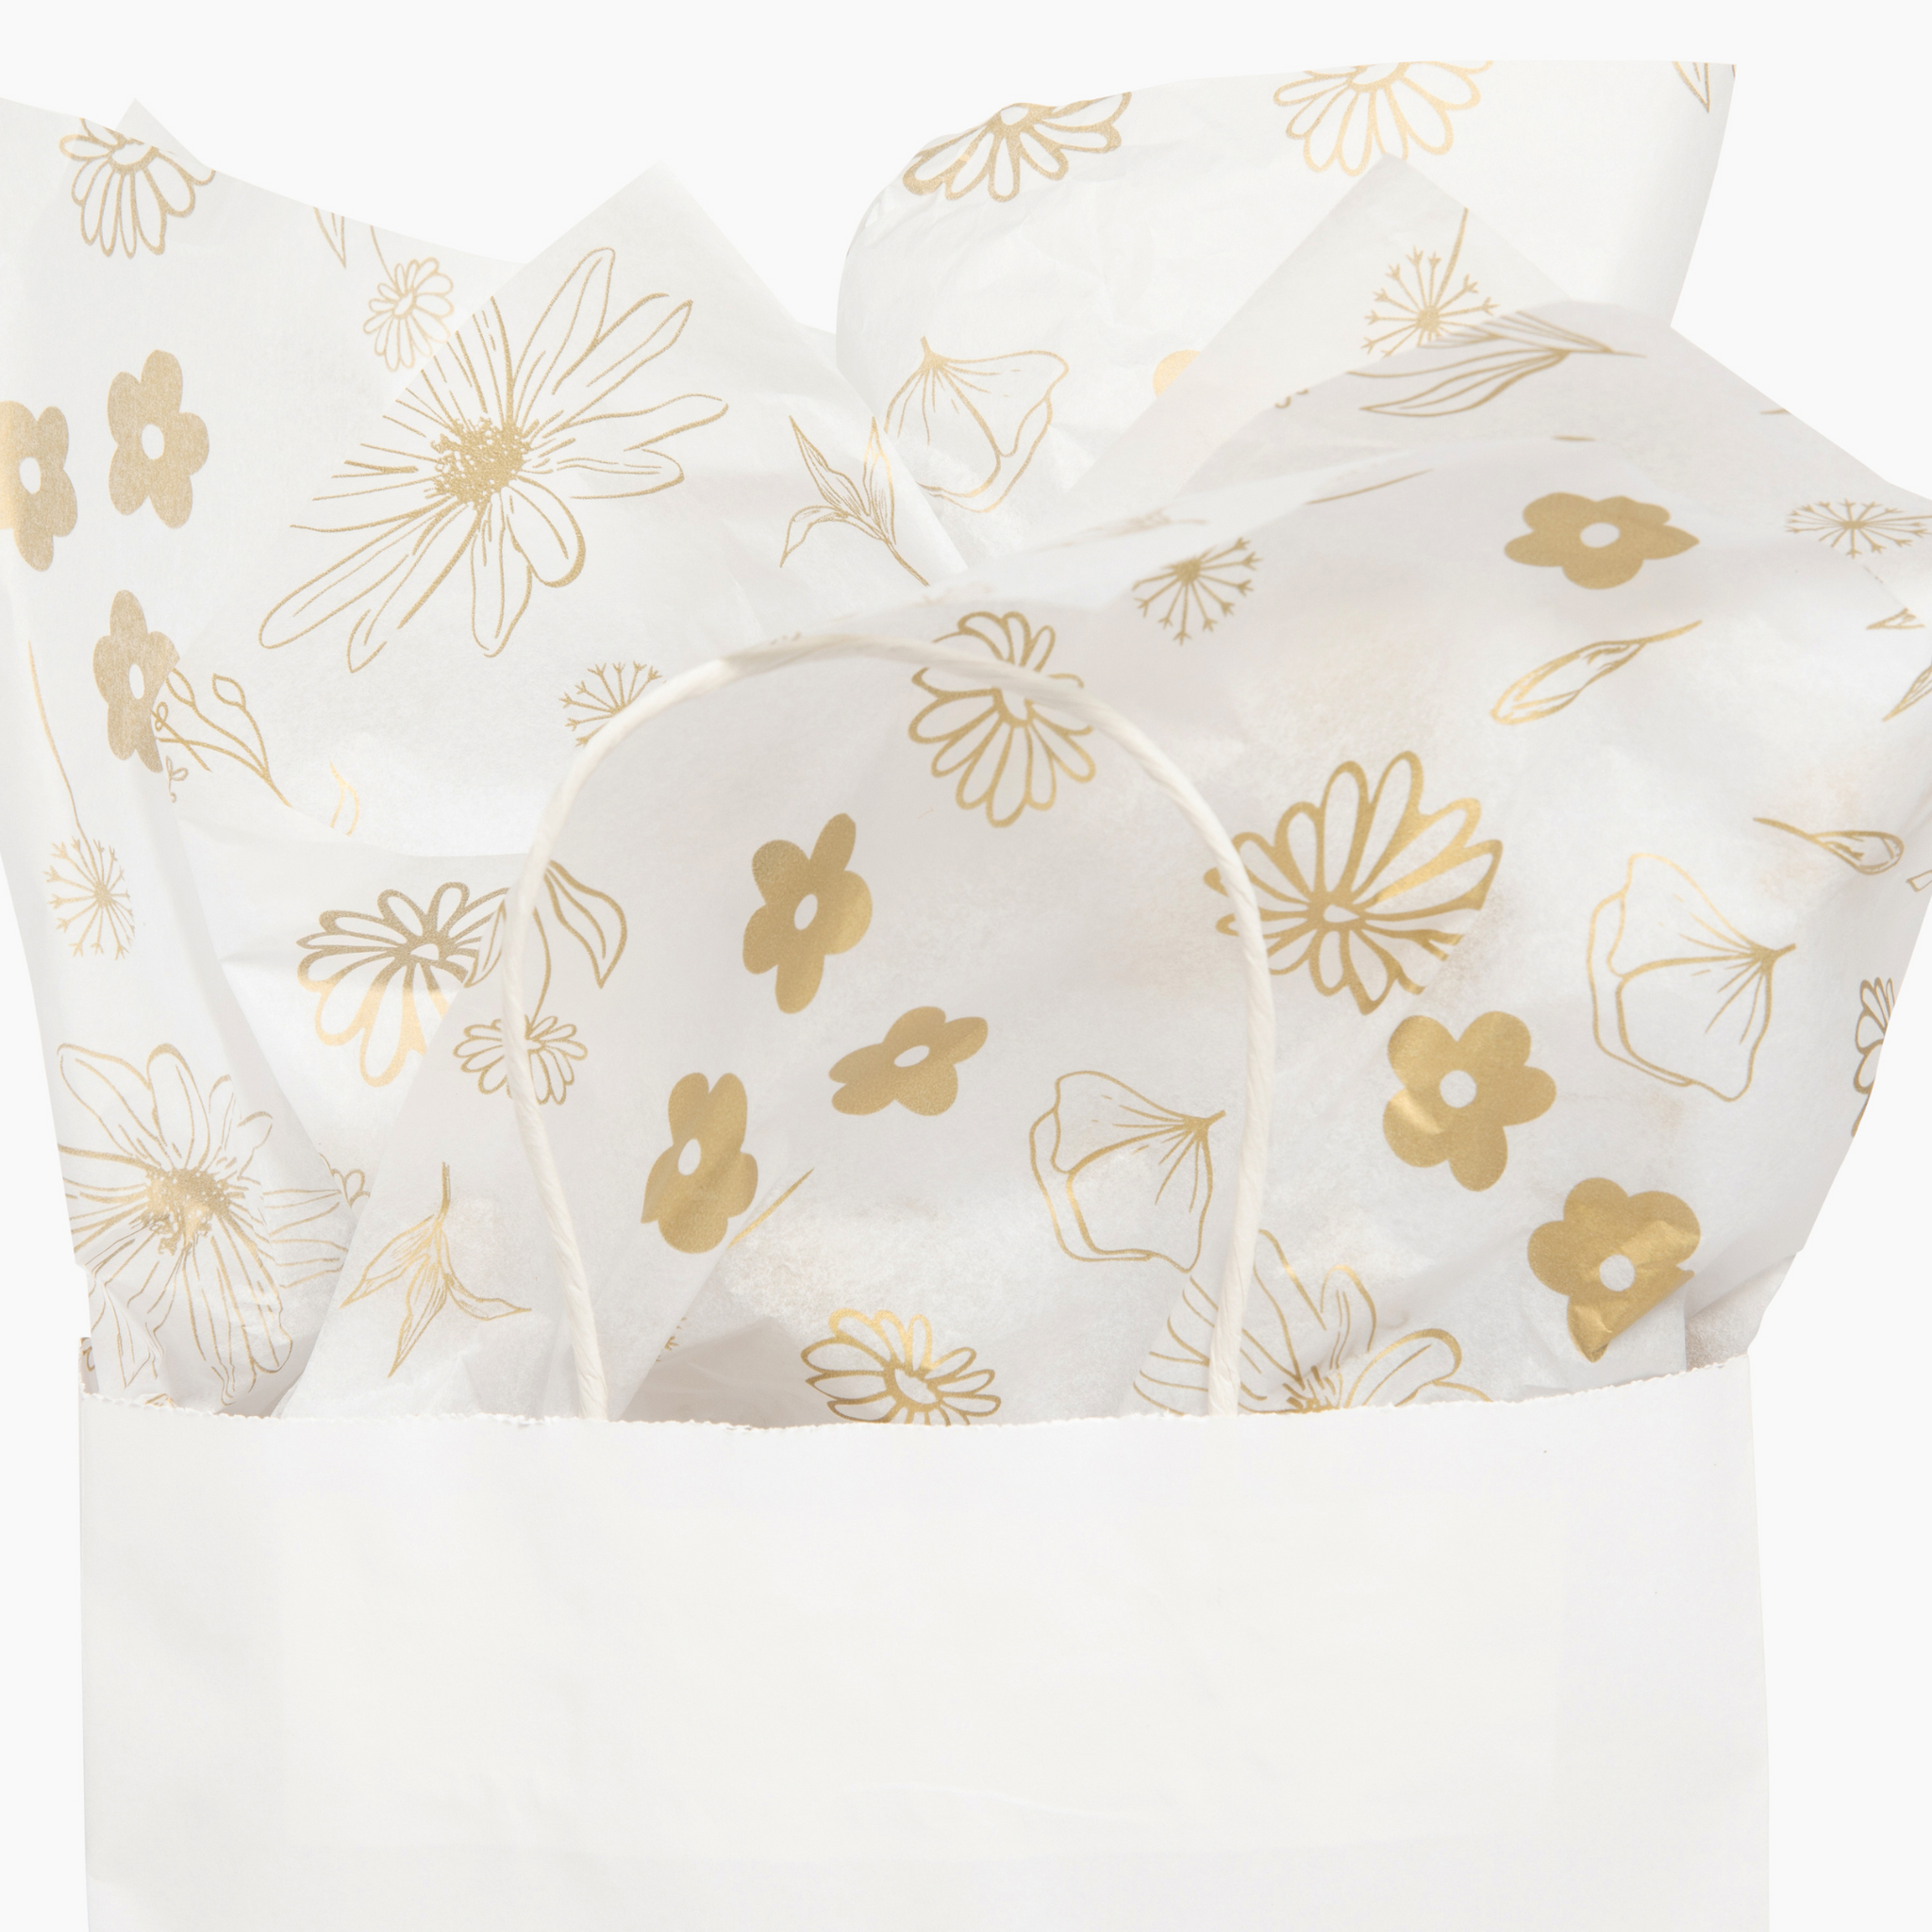 Floral on White Tissue Paper Sheets, Luxury Tissue Paper, Perfect for  Birthdays, Easter, Mothers Day, Events, Celebrations & Gift Wrapping -   Singapore